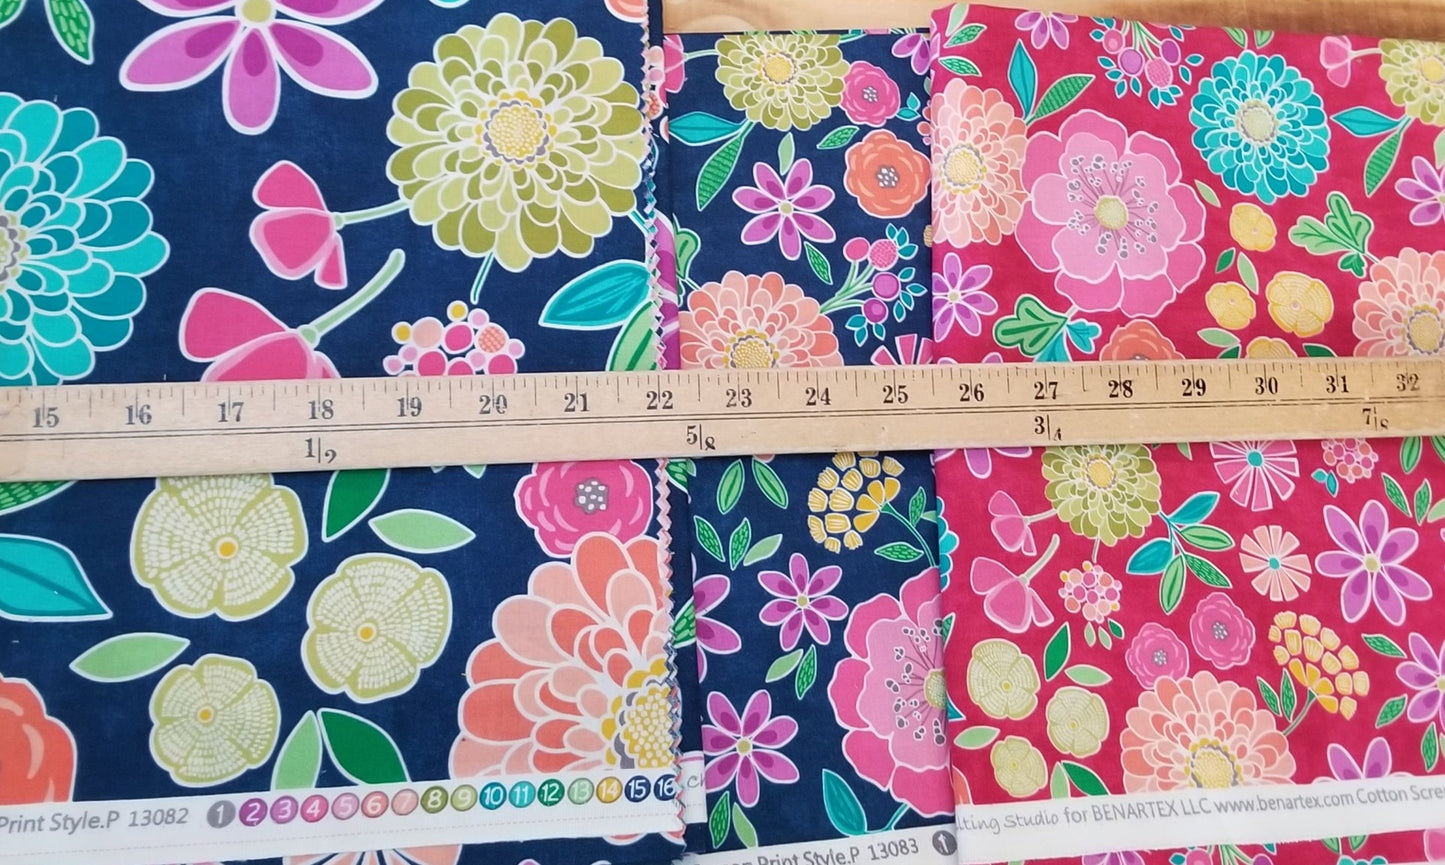 End of Bolt 3 yard case pack: 3 pieces of Quilting Cottons Floral Benartex (1 yard cuts)- As pictured